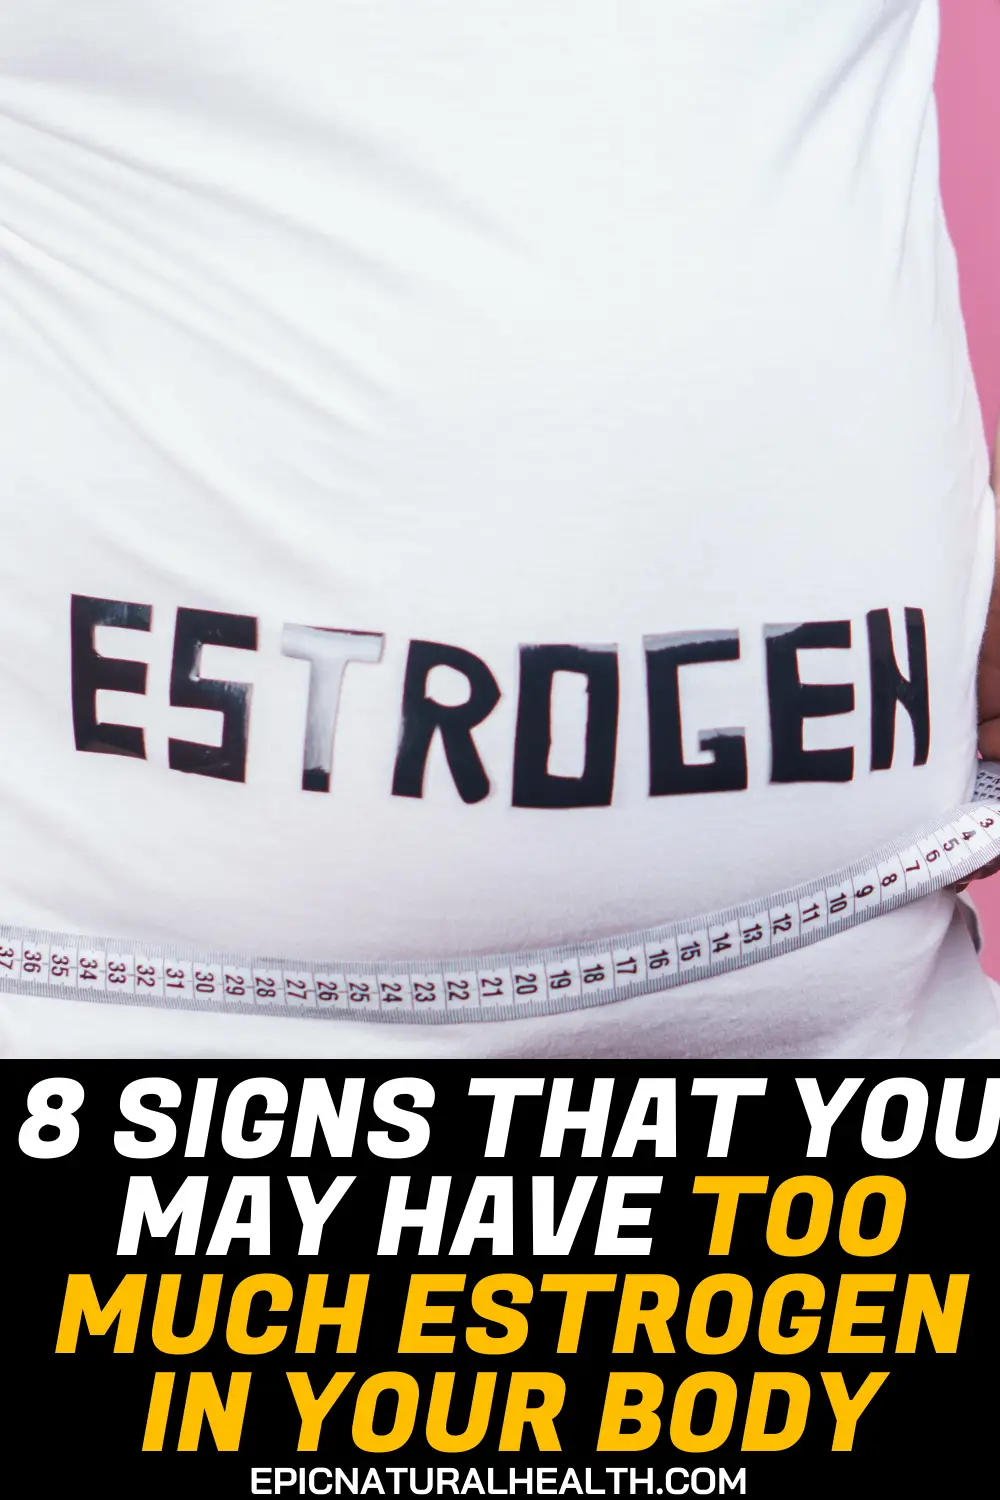 8 signs that you may have too much estrogen in your body